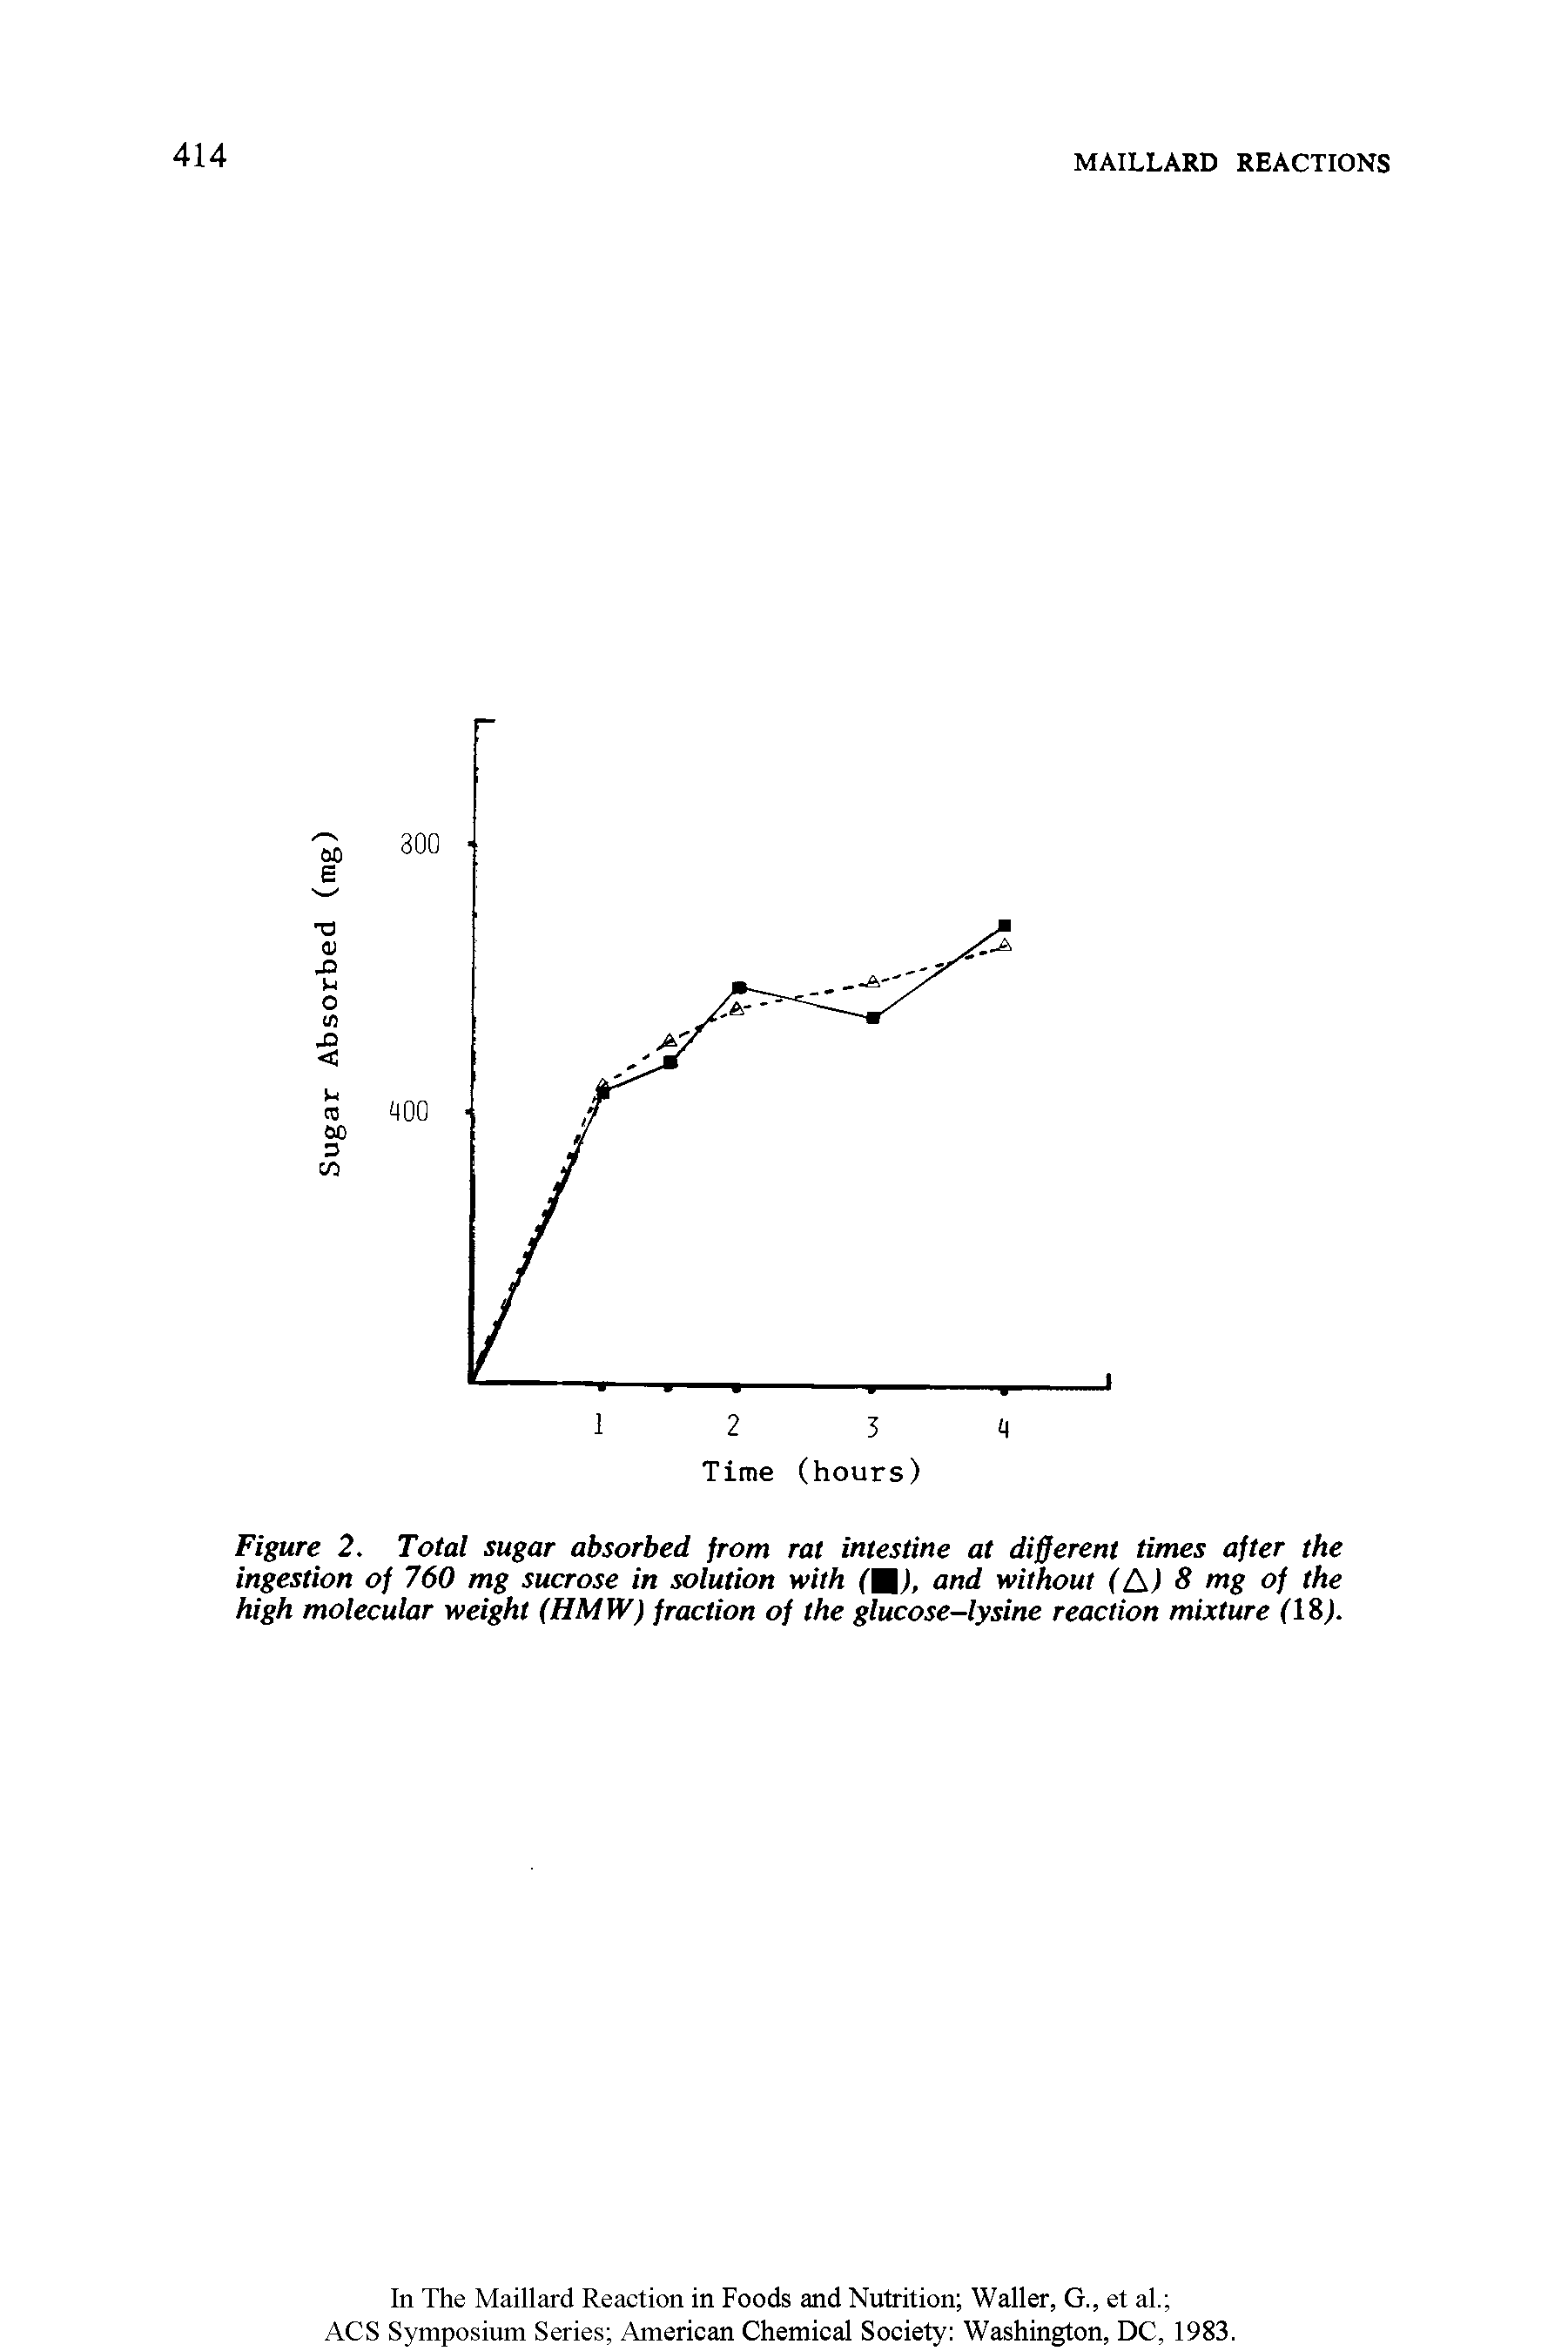 Figure 2. Total sugar absorbed from rat intestine at different times after the ingestion of 760 mg sucrose in solution with (U), and without (AJ 8 mg of the high molecular weight (HMW) fraction of the glucose-lysine reaction mixture (IS).